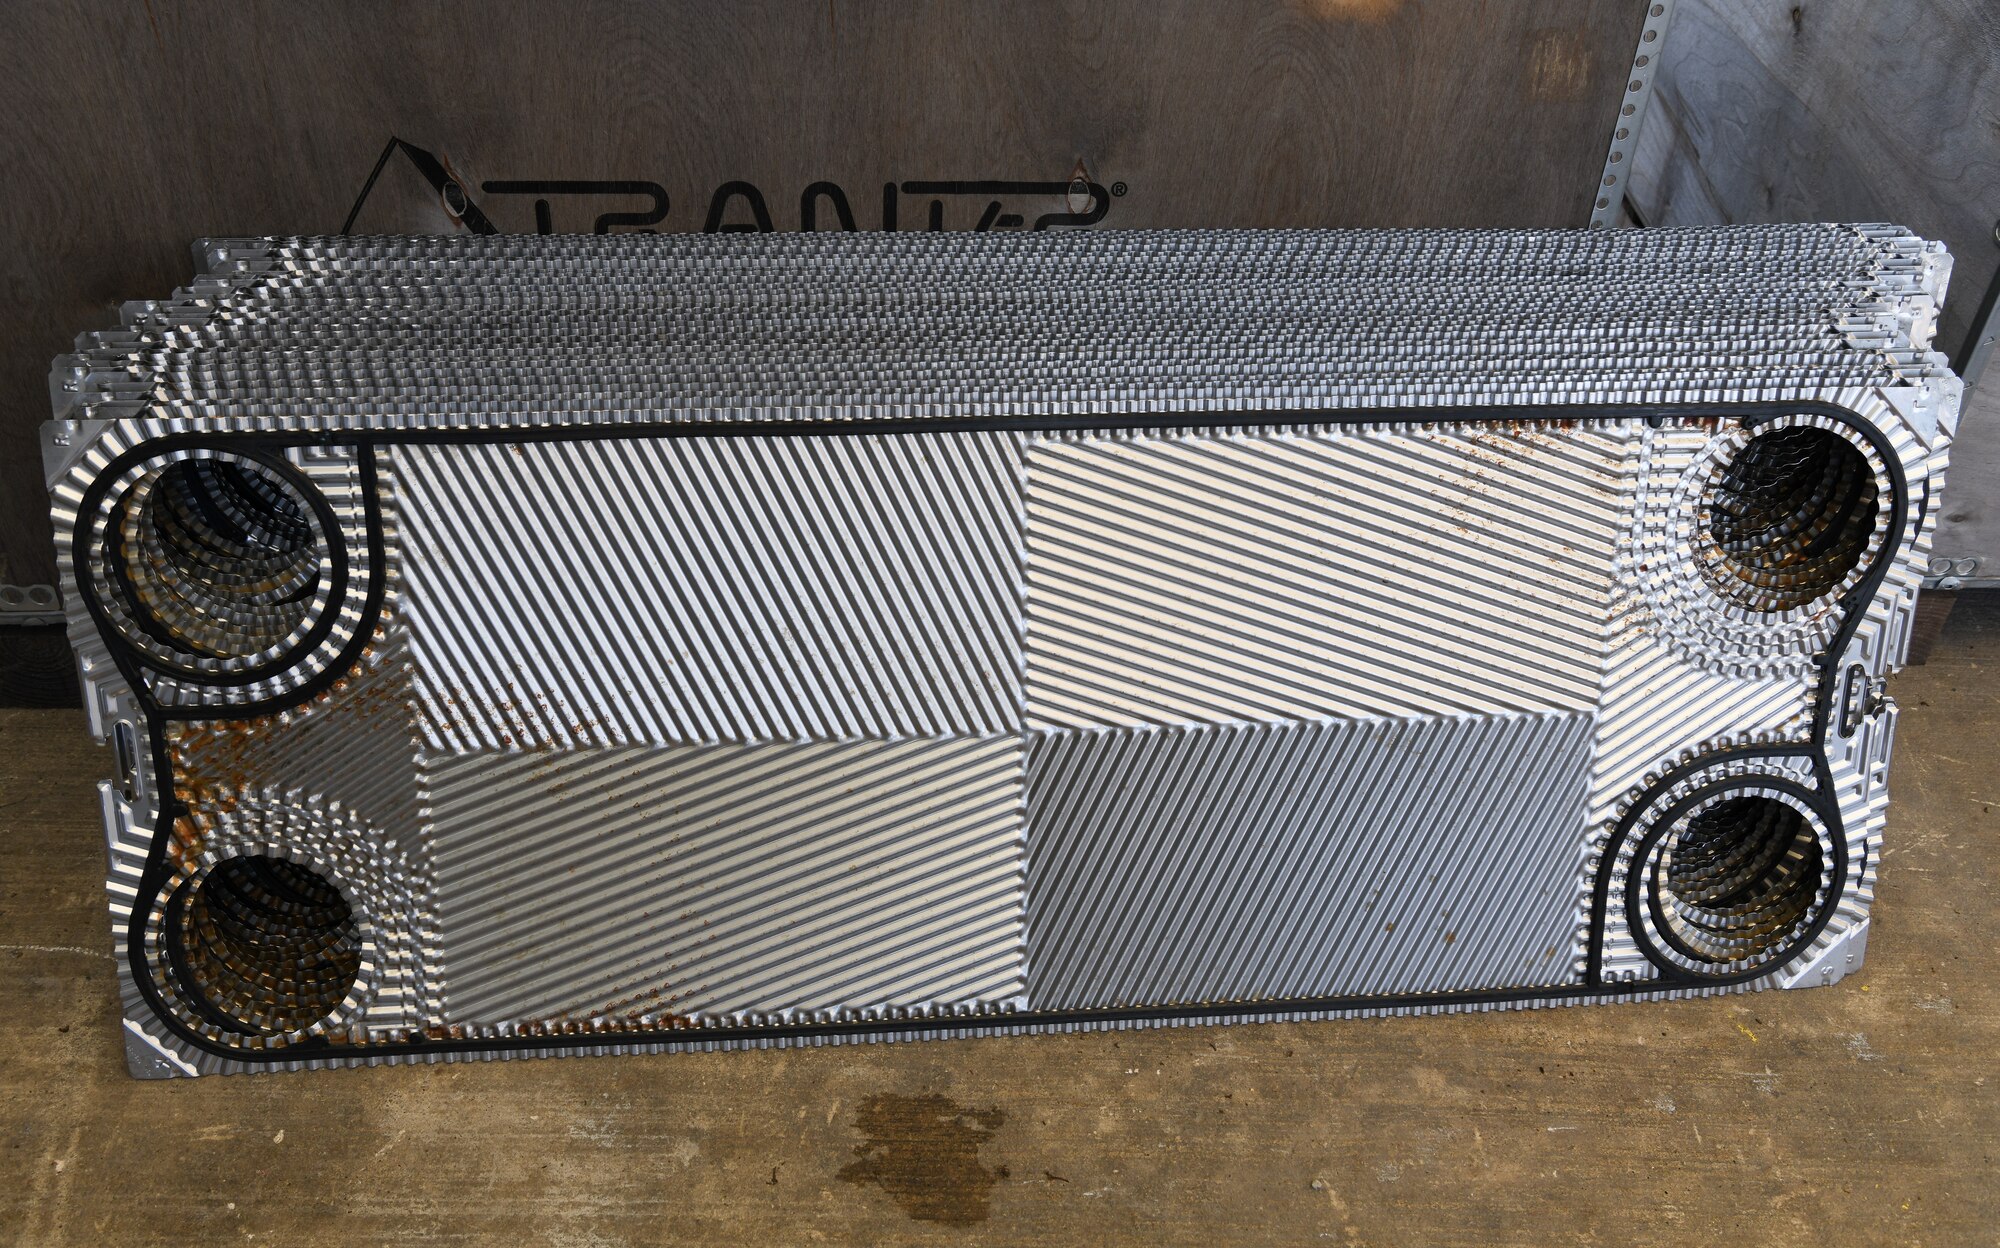 Panels with ridges leaning against a box